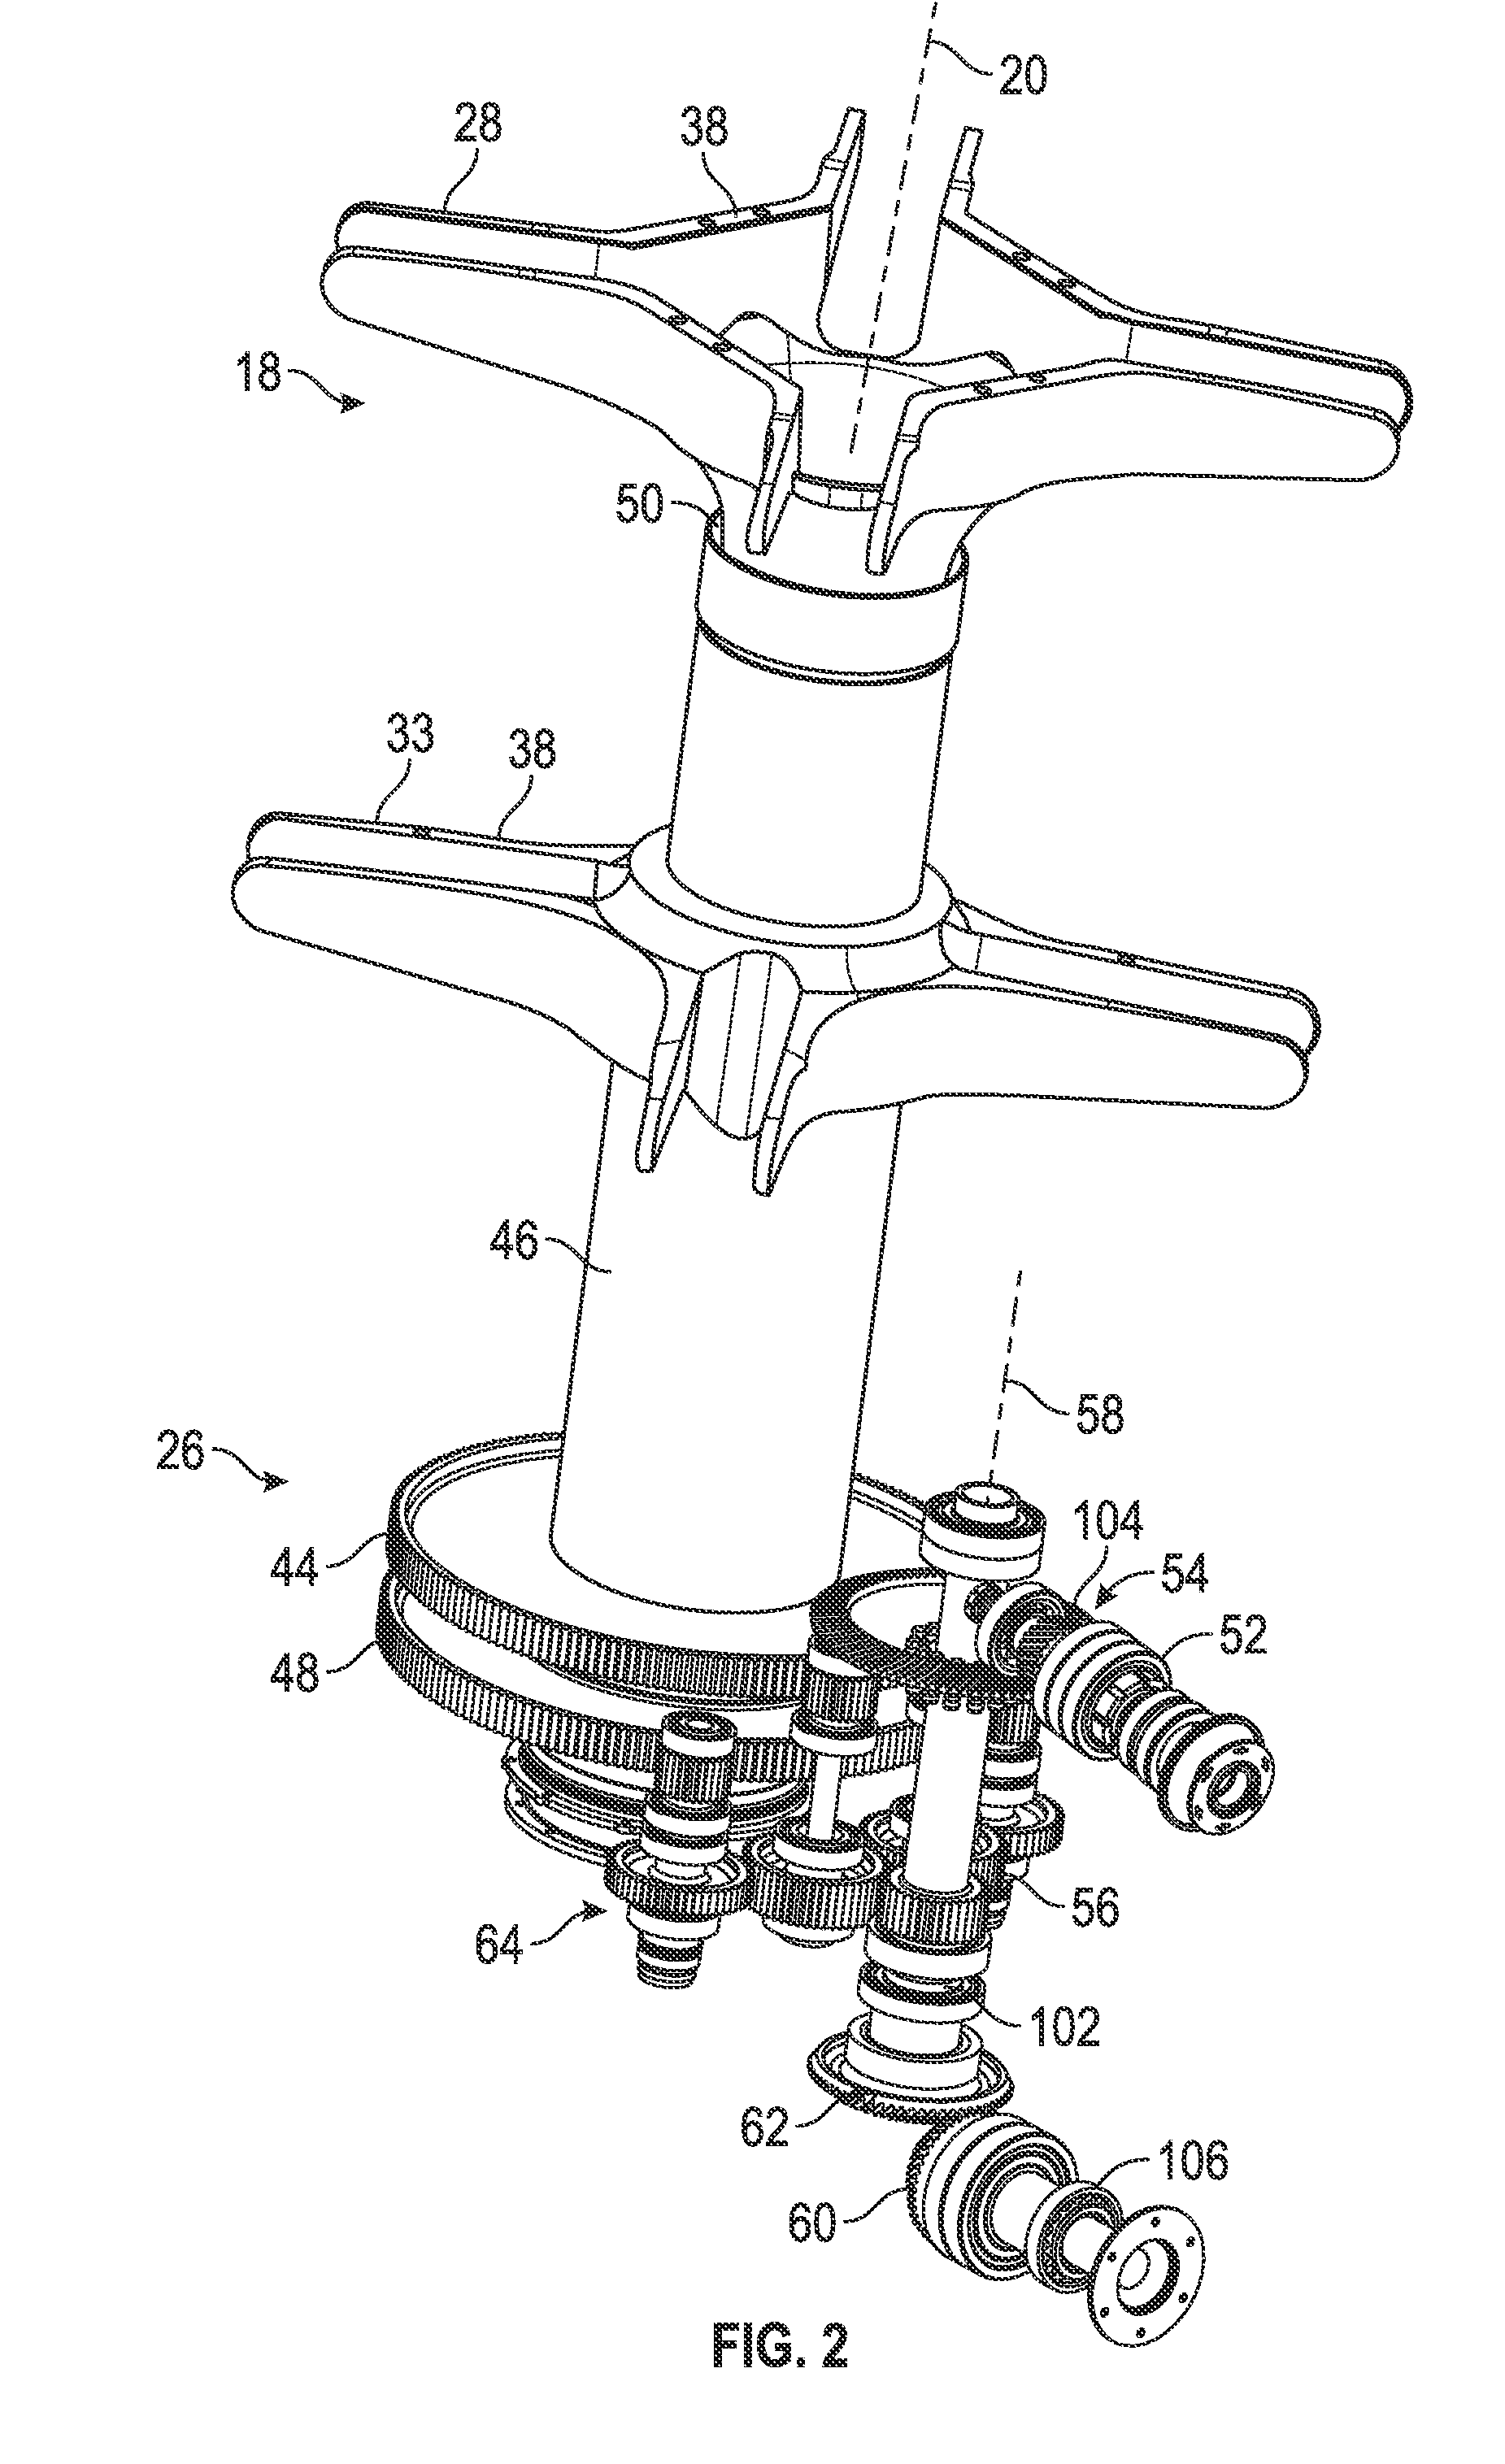 Torque split gearbox for rotary wing aircraft